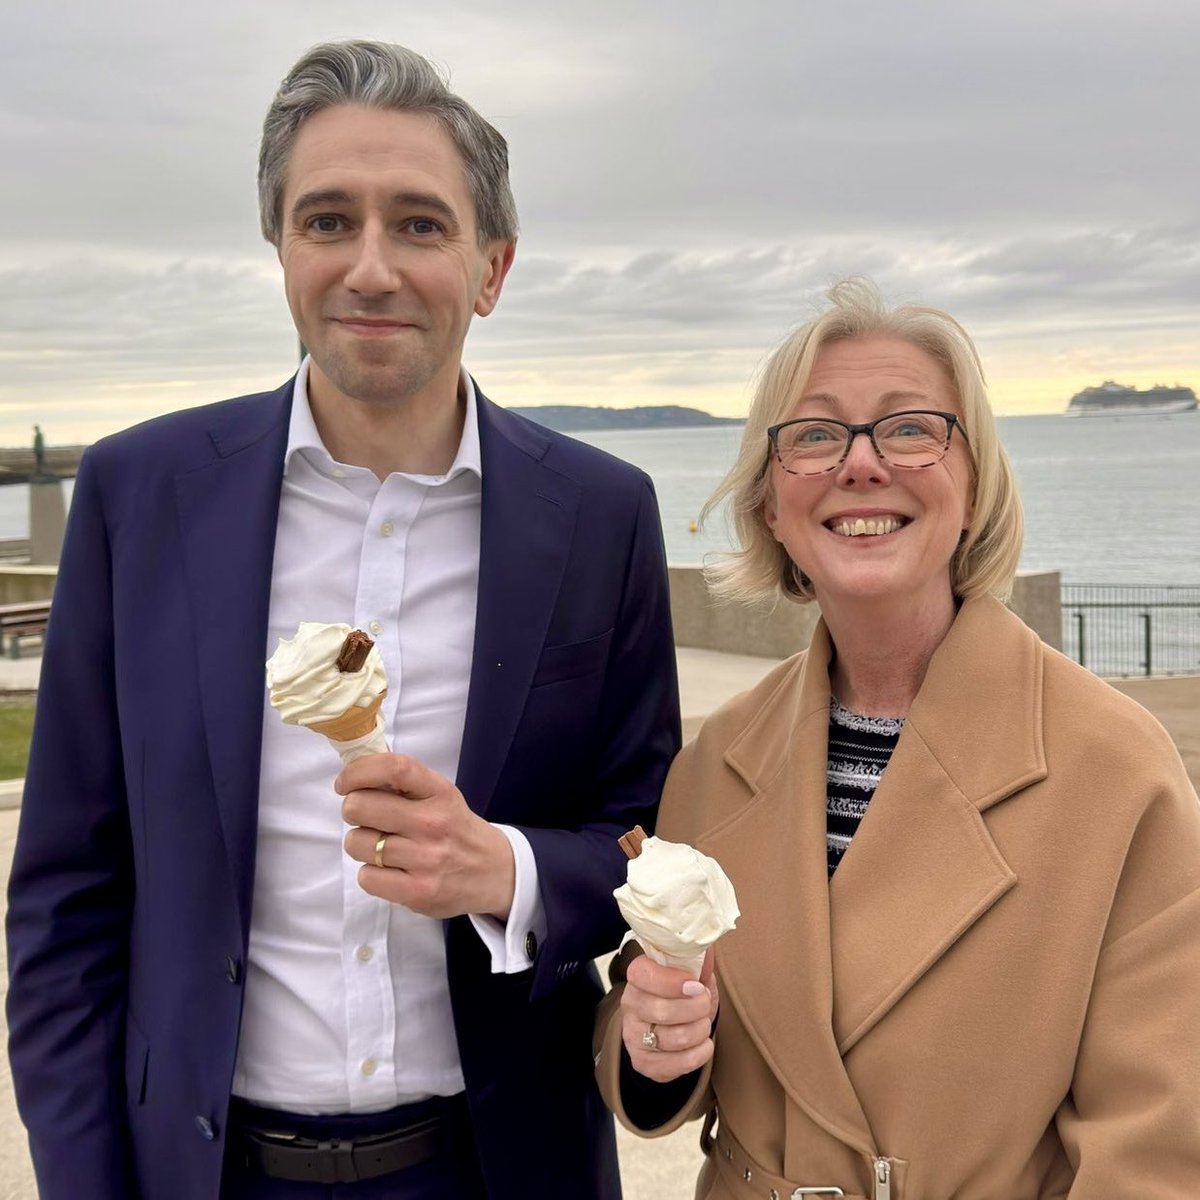 Ireland is going down in flames while these traitors post a photo today of themselves eating ice-cream. It reminds of Nero fiddled while Rome burned. Liberty Republic stands with the people of #Newtownmountkennedy . Garda thuggery must be investigated post next general election.